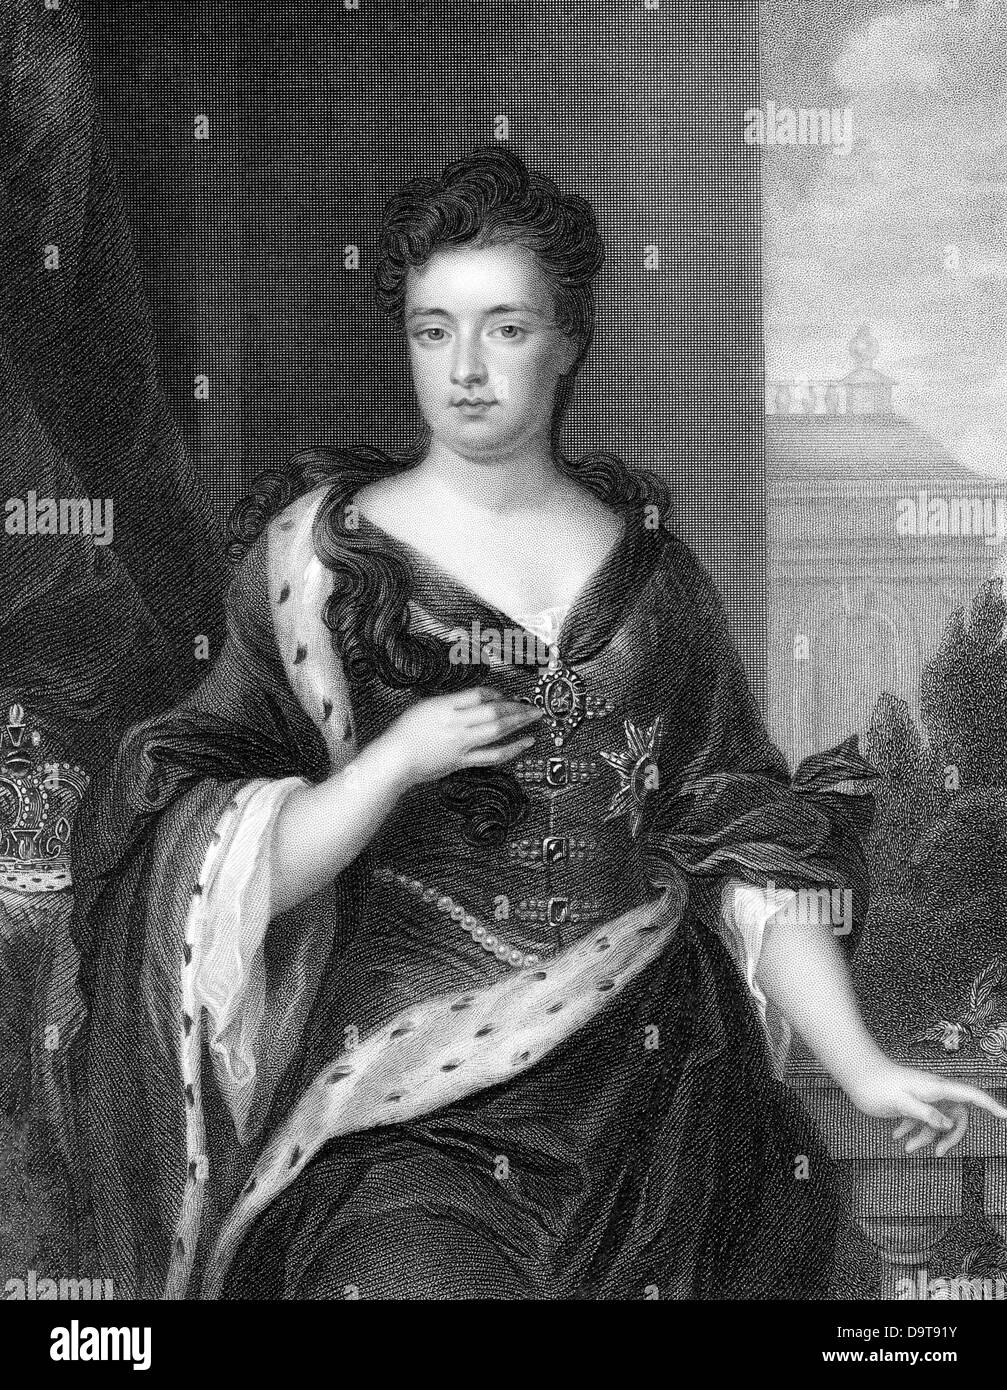 Anne Queen of Great Britain and Ireland from 1702 Engraving Stock Photo